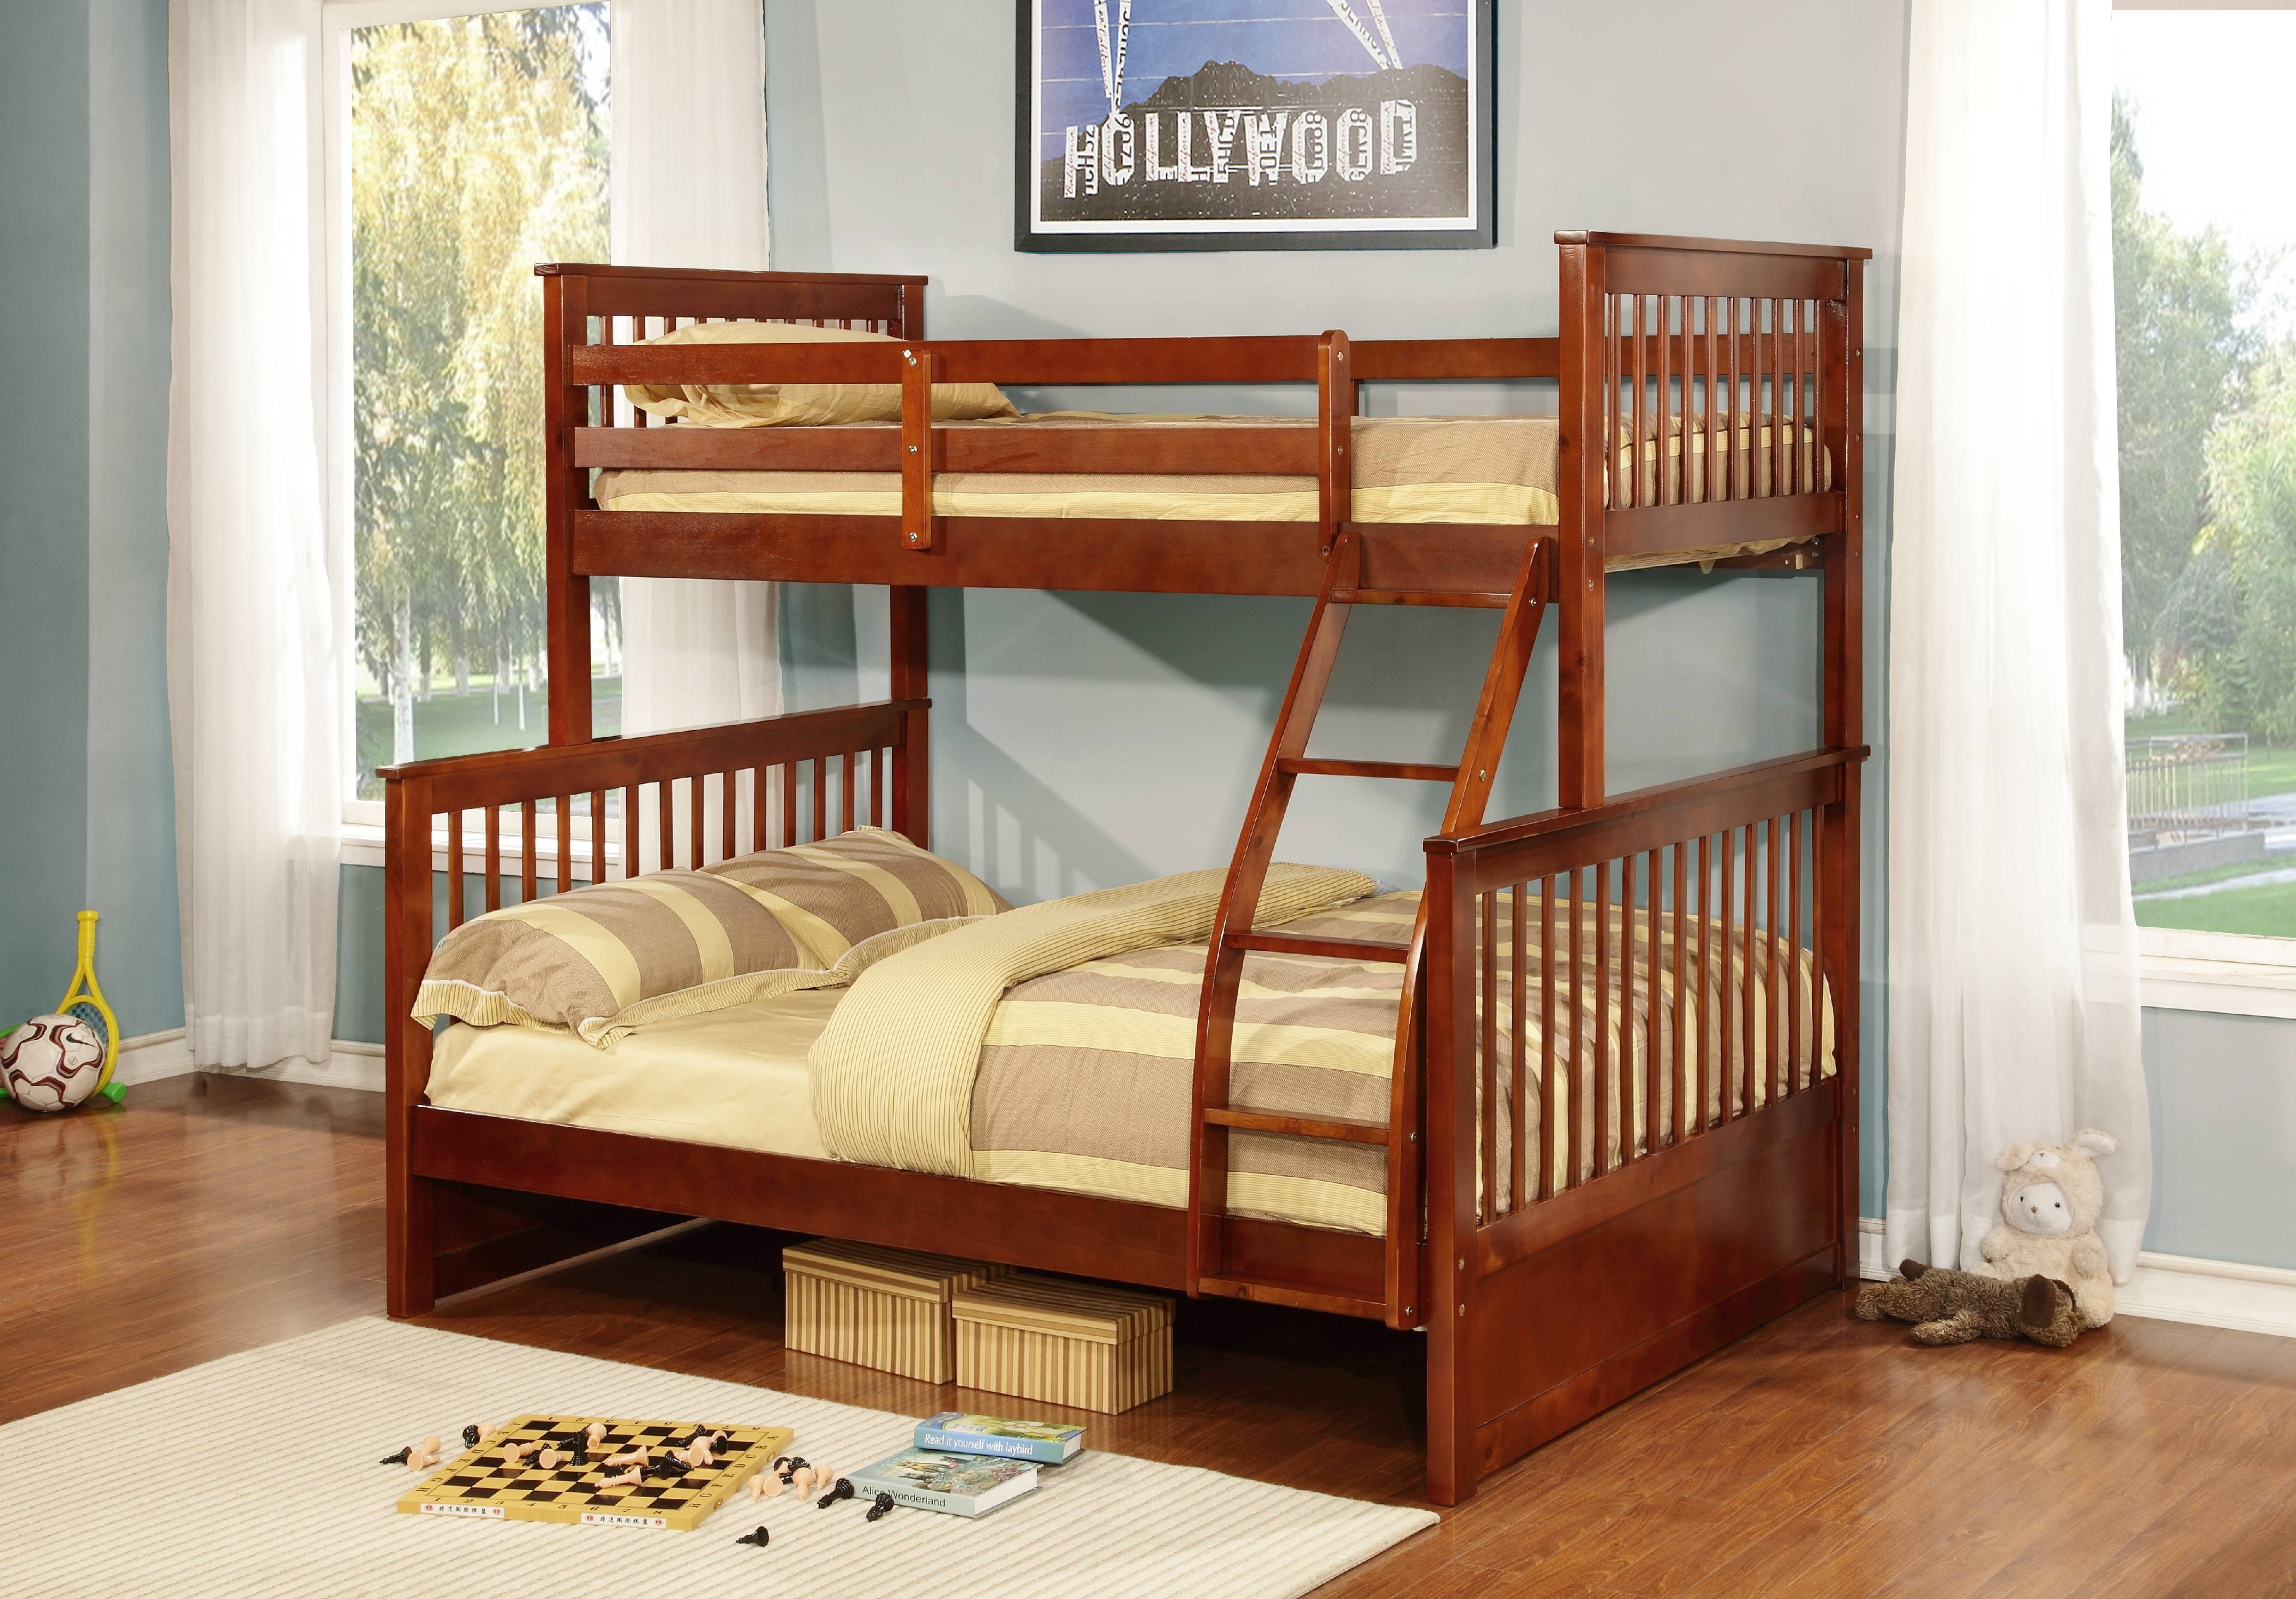 Full Bunk Bed Walnut Wood, Your Zone Twin Over Full Bunk Bed Walnut